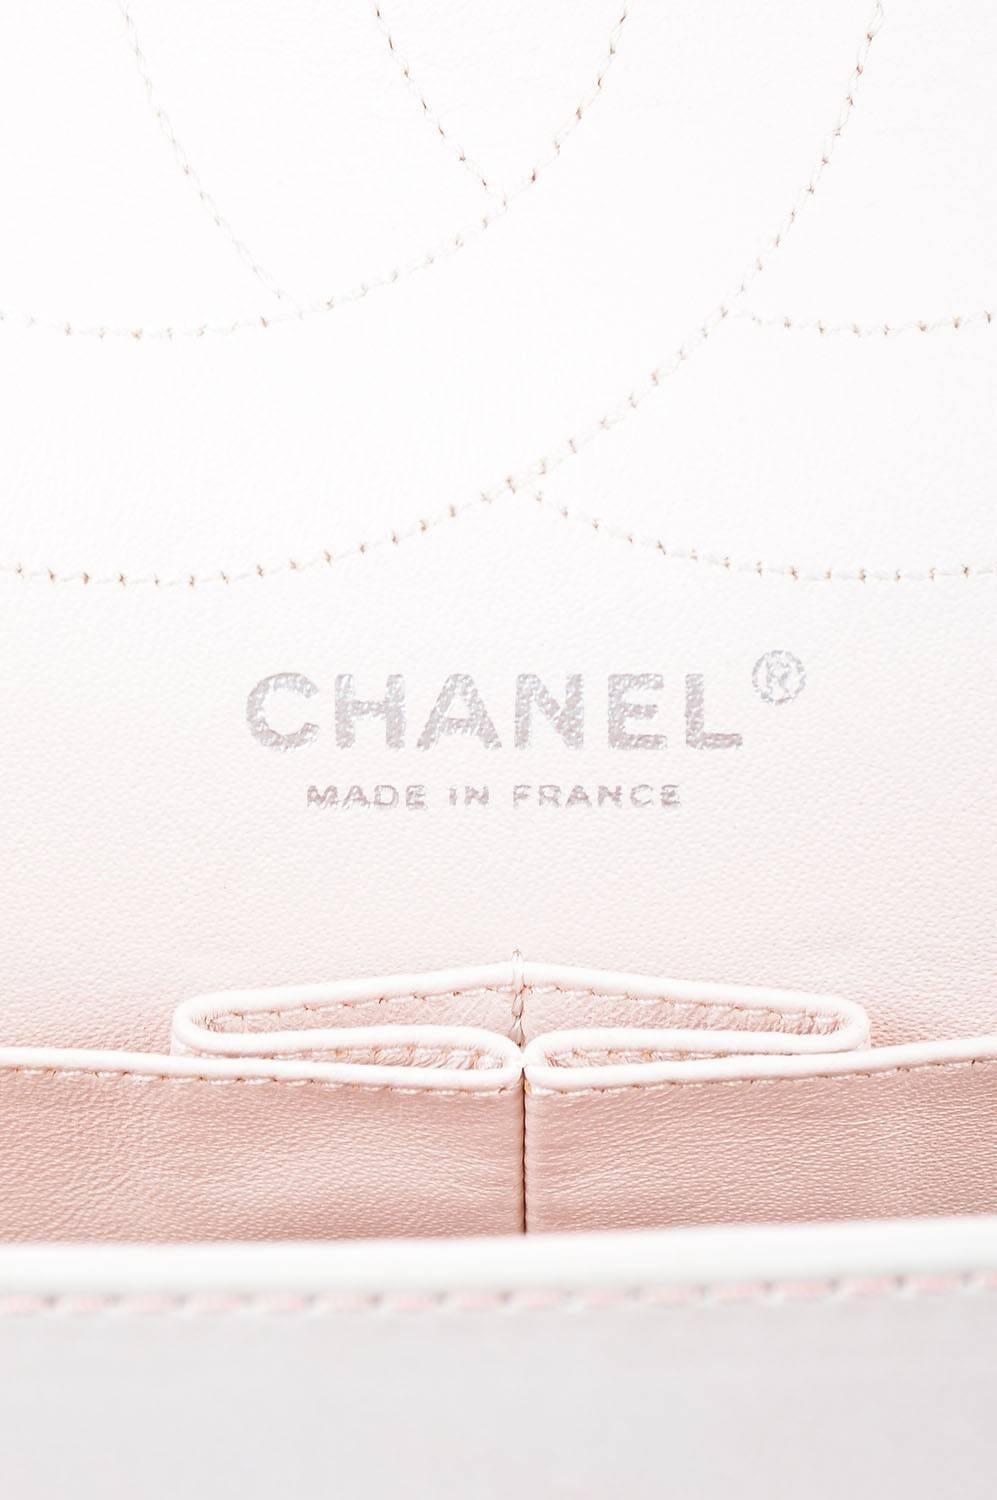 Chanel Pink White Leather Ombre Degradé 